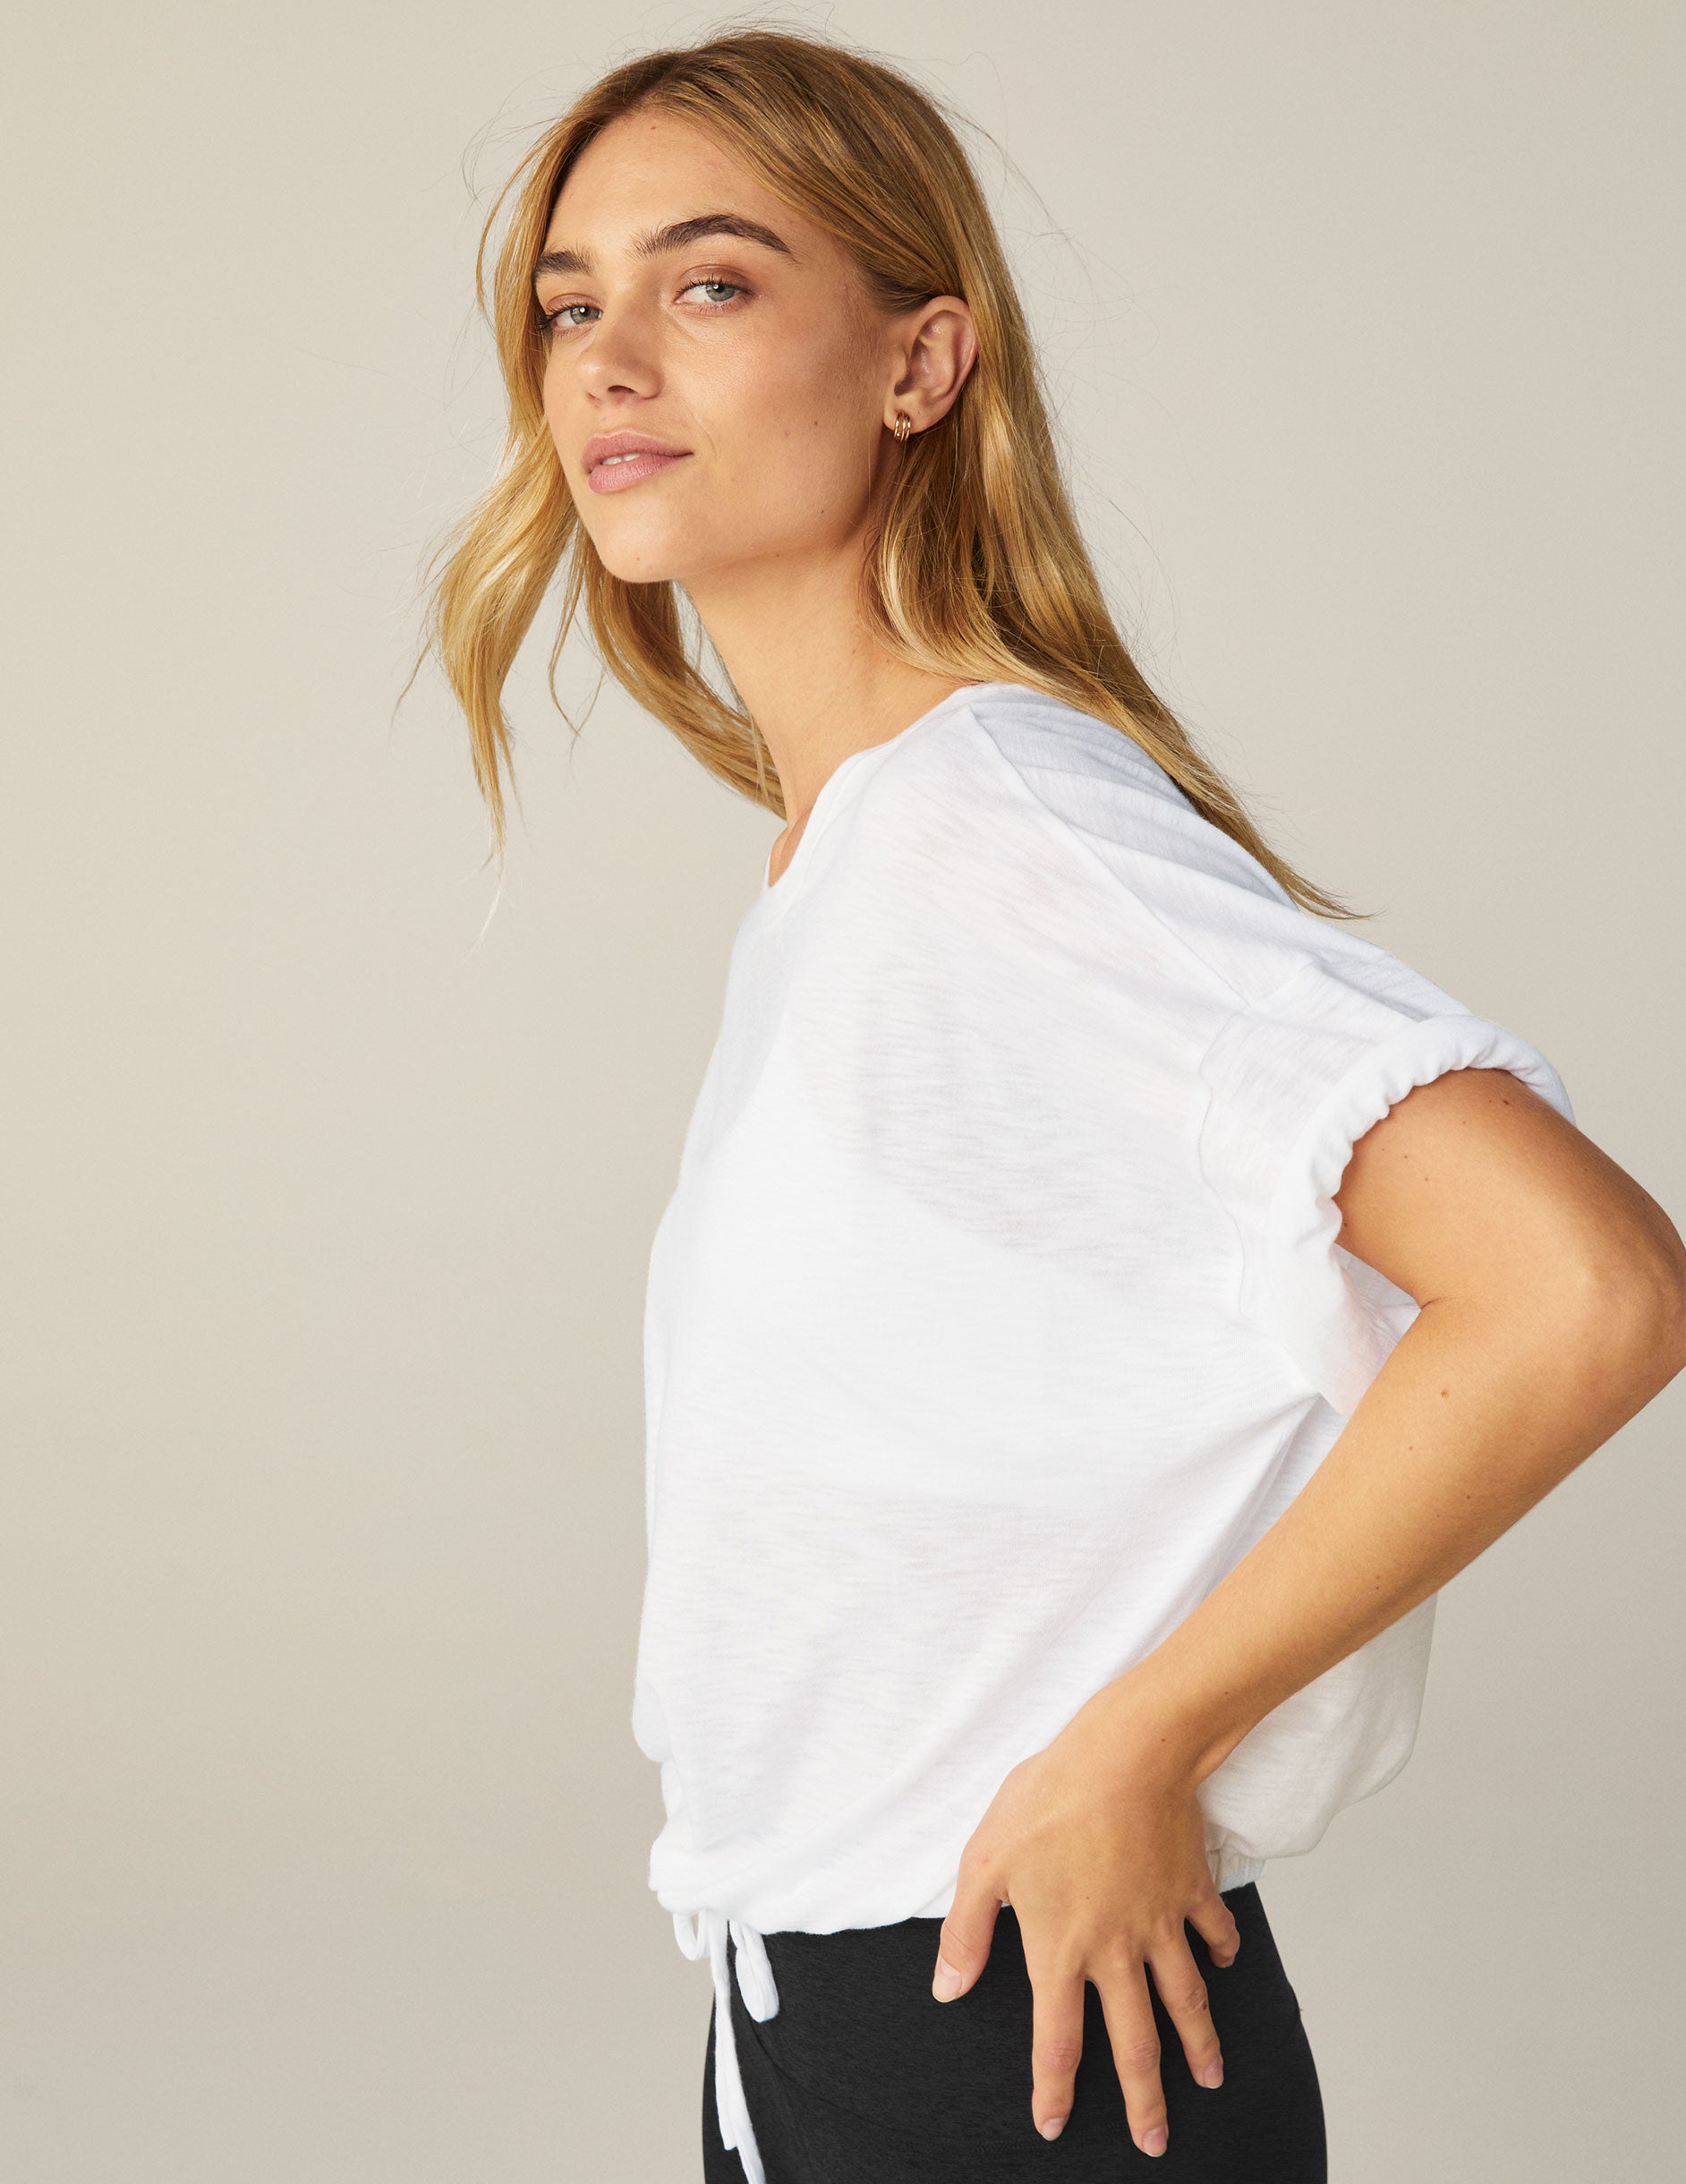 white short sleeve top with tie detail